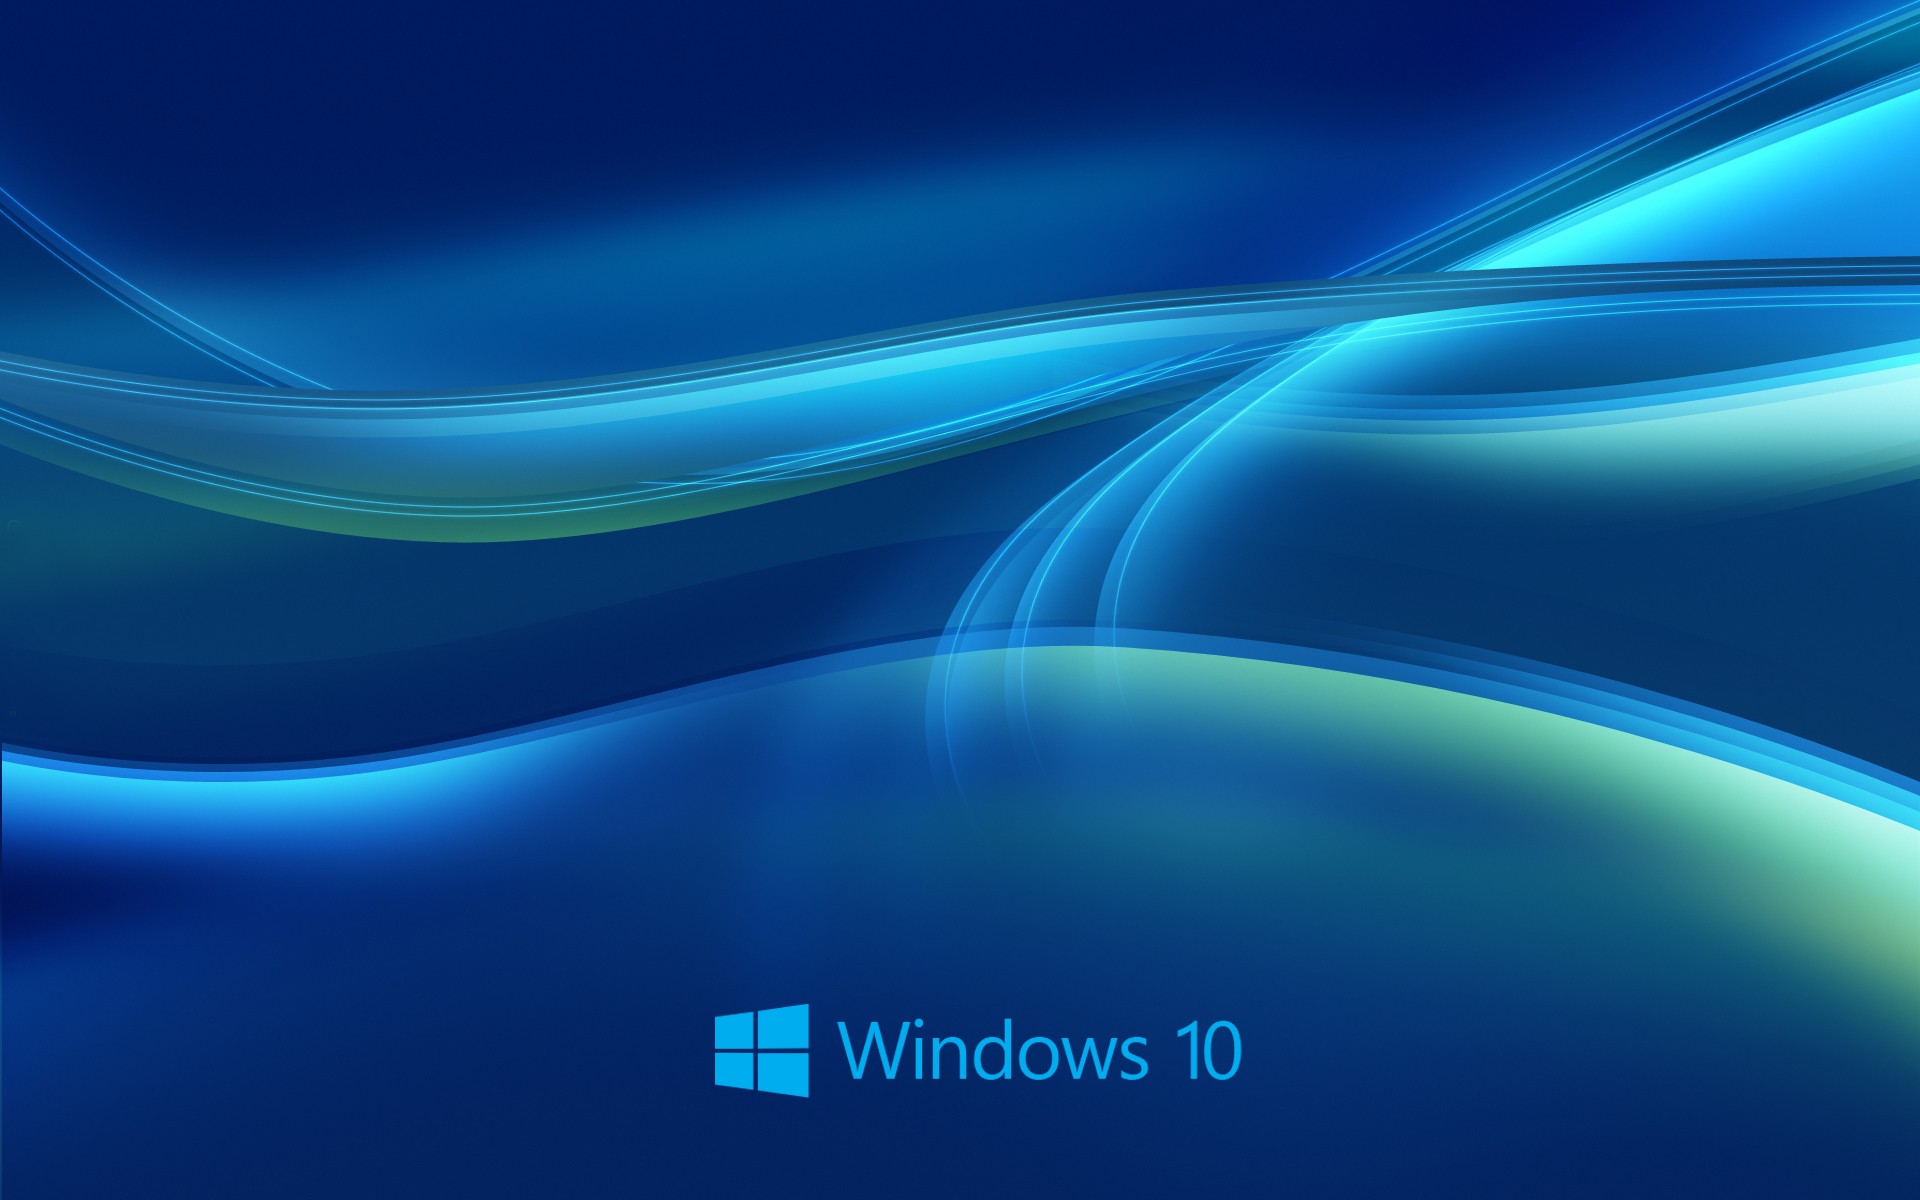 Windows 10 Desktop Wallpaper Download Free Cool Backgrounds For Desktop And Mobile Devices In